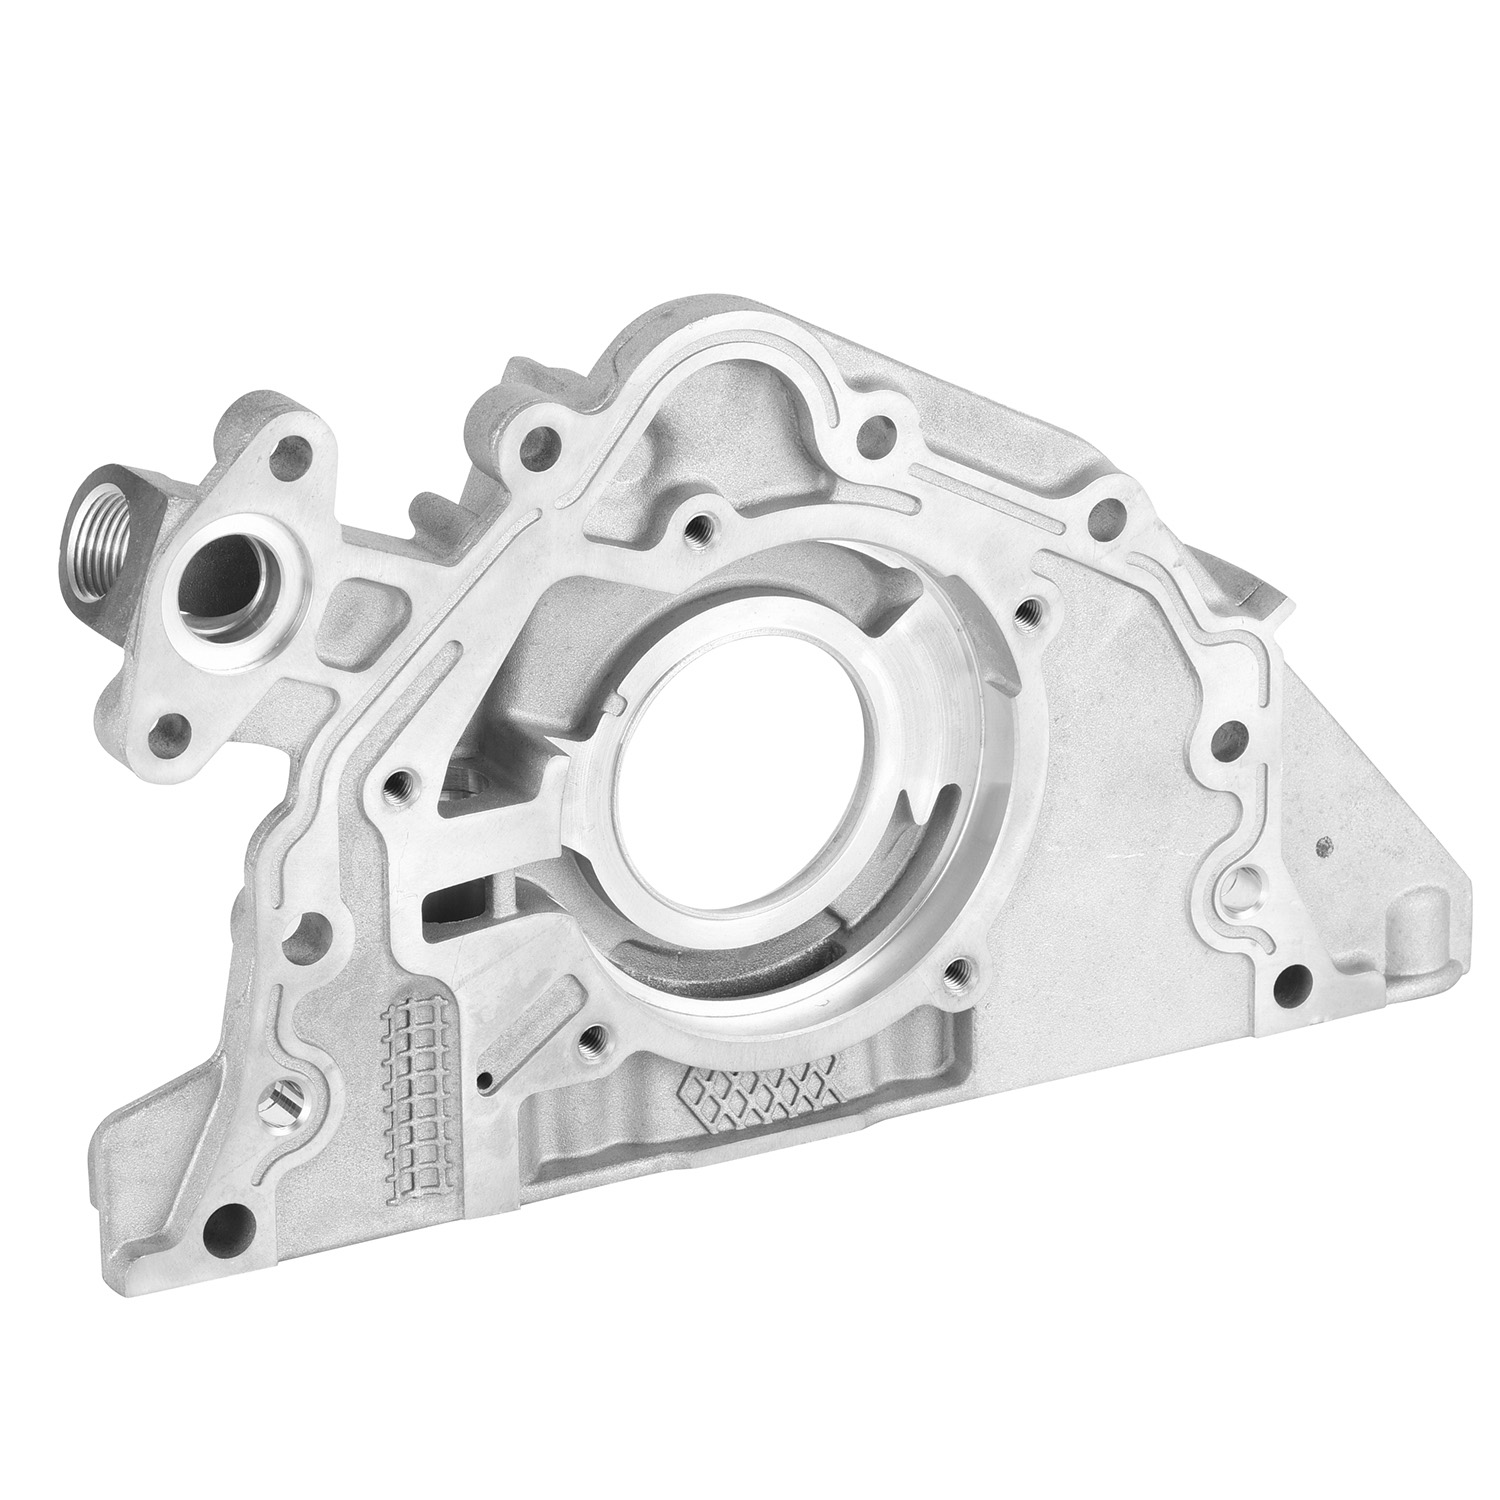 043.Aluminum Alloy Die Casting side cover YL102-2022-08-16